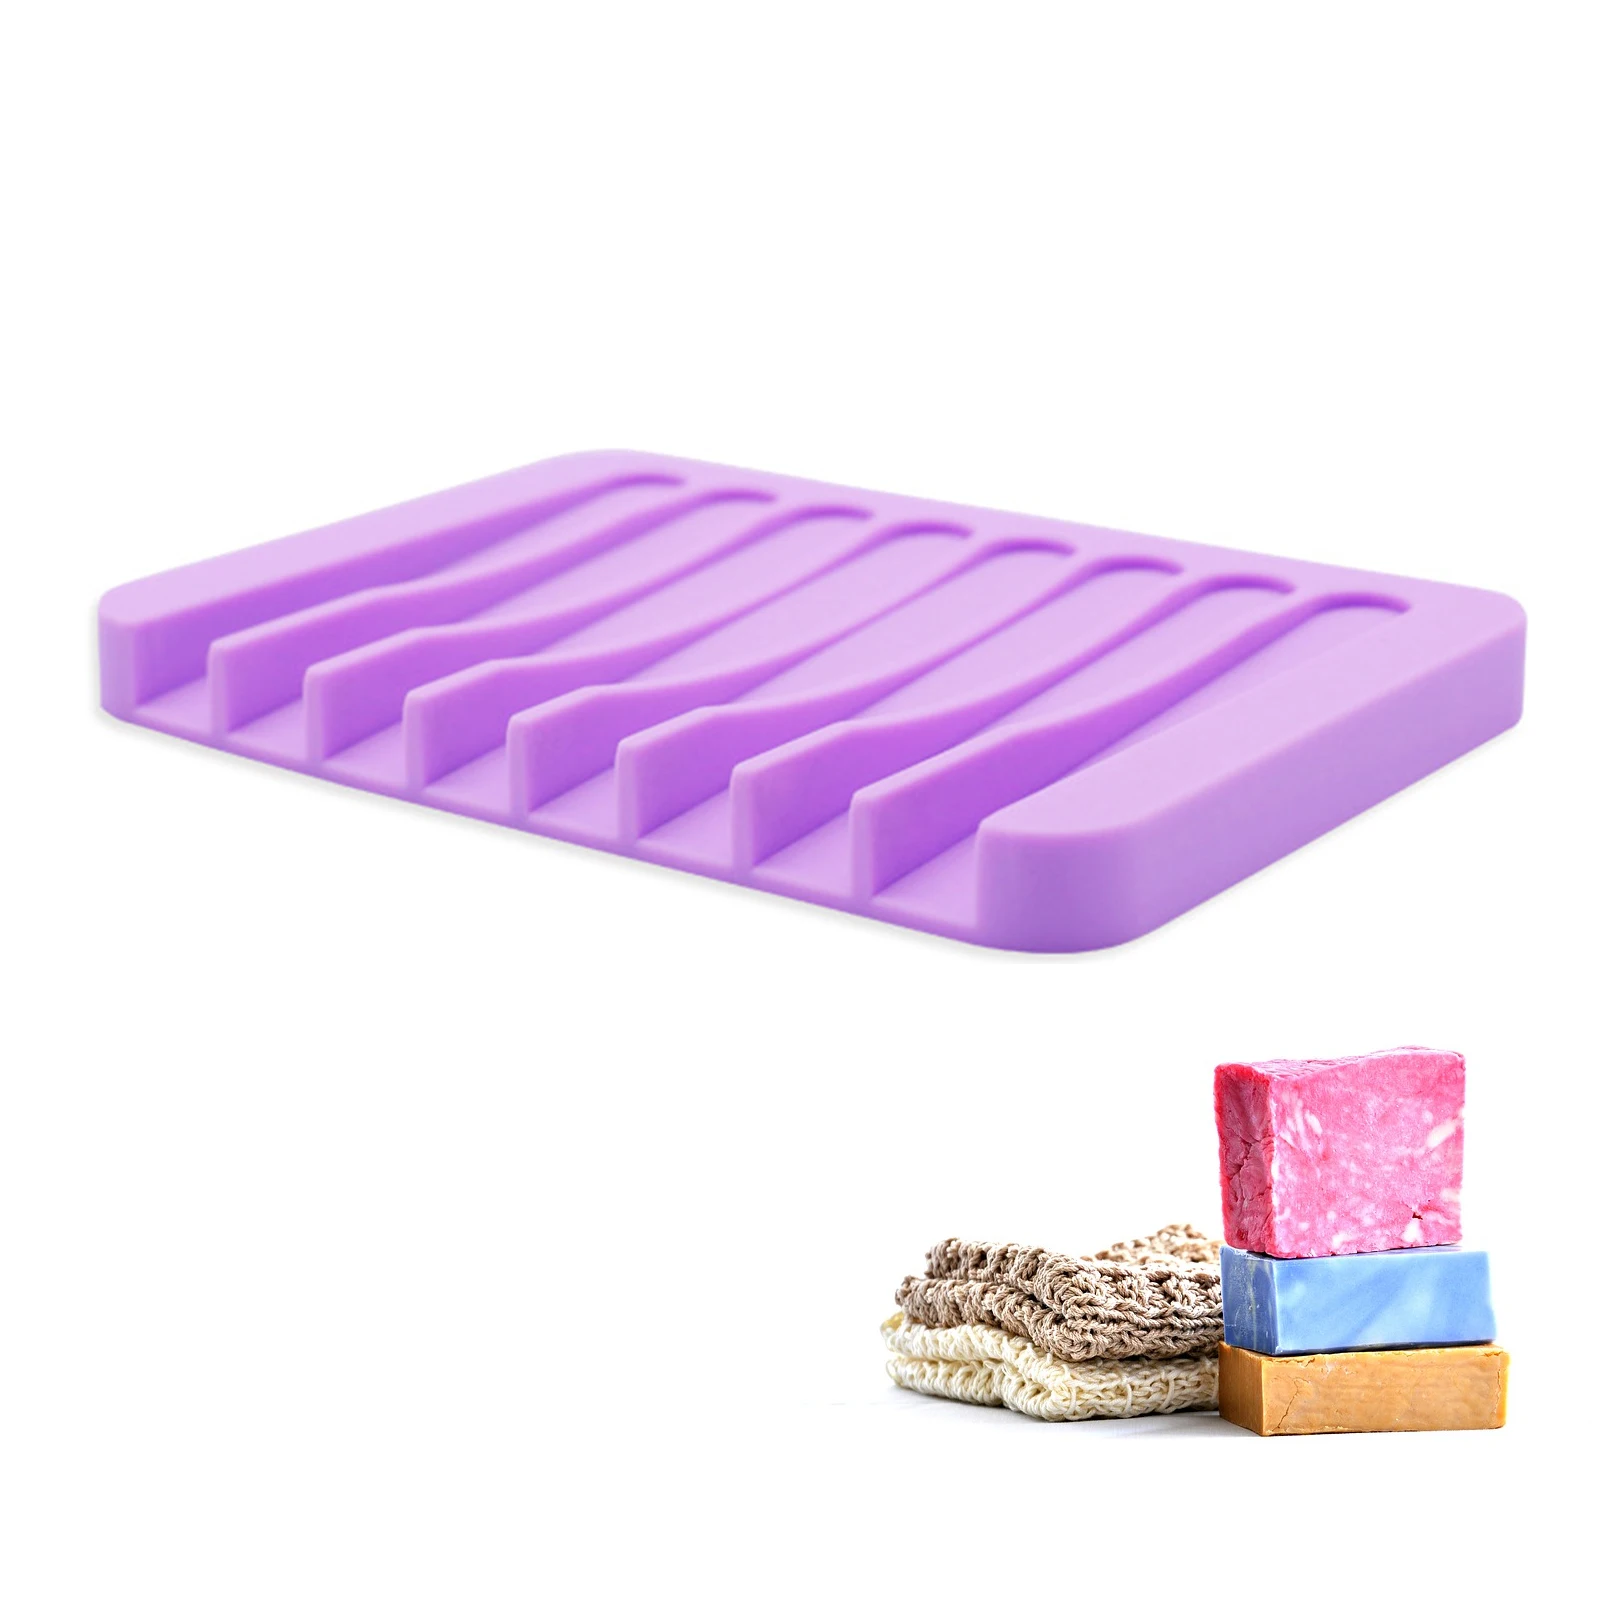 

Self Draining Soap Dish Soap Dishes For Bar Soap Easy Cleaning Soap Tray With Decline Self Draining Soap Saver For Shower